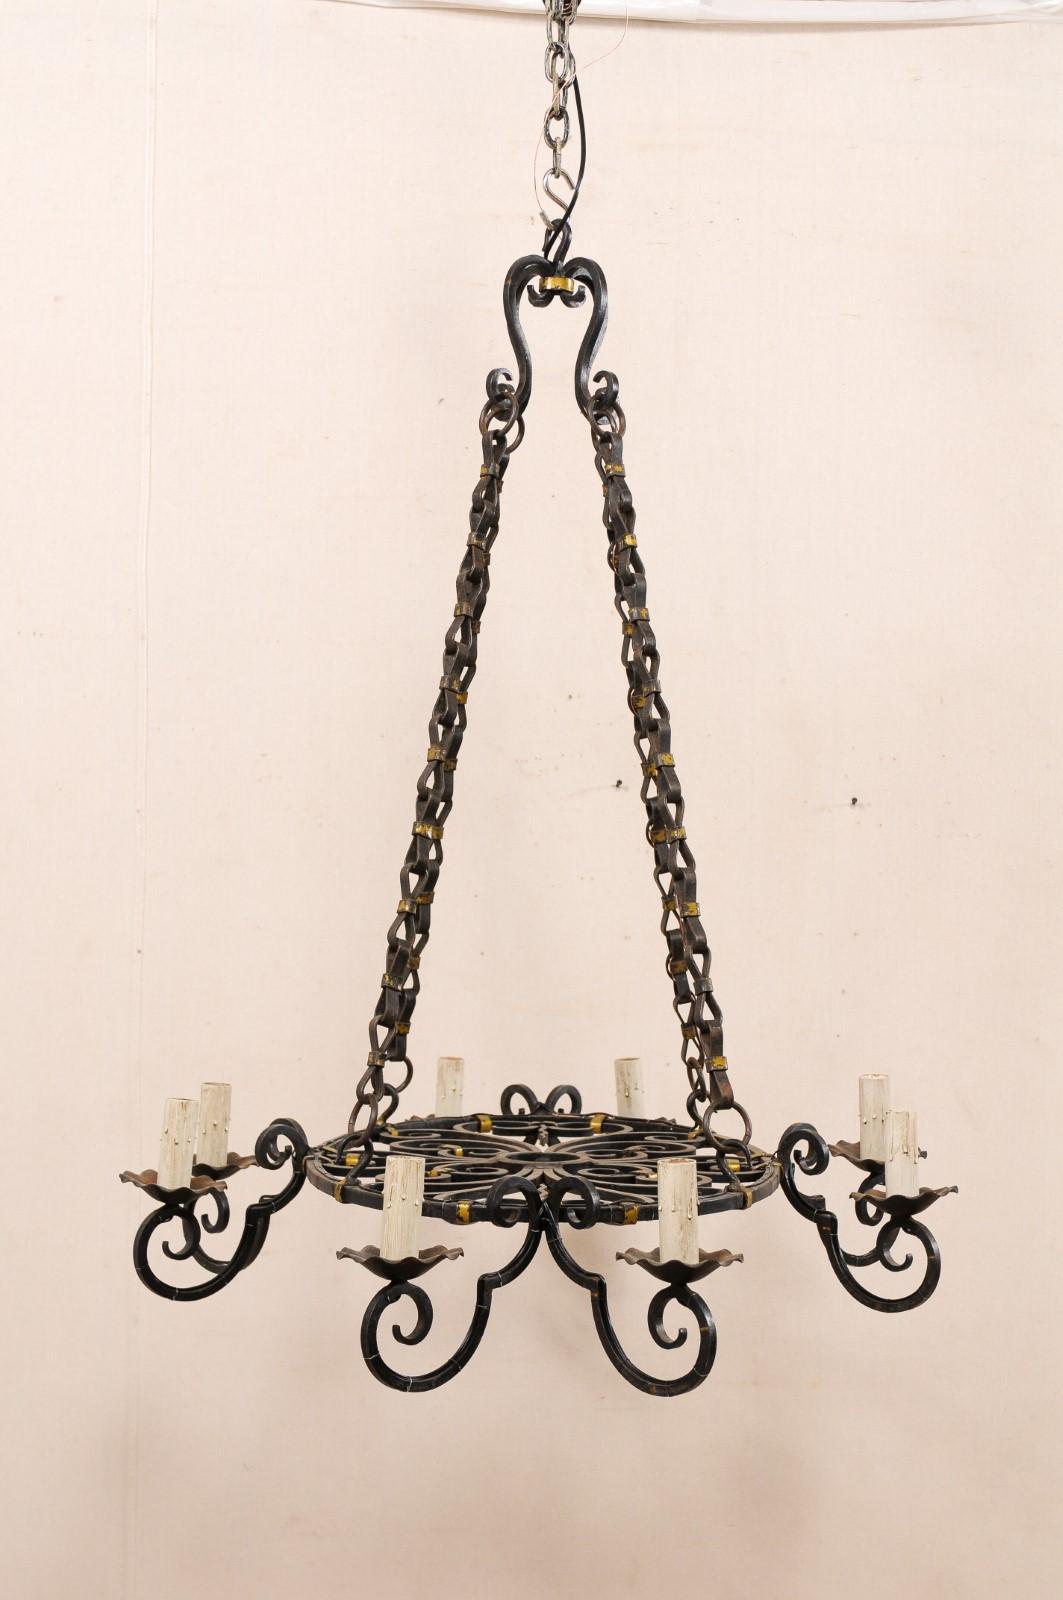 20th Century French Oval-Shaped, 8-Light, Forged-Iron Chandelier with Gold Accents For Sale